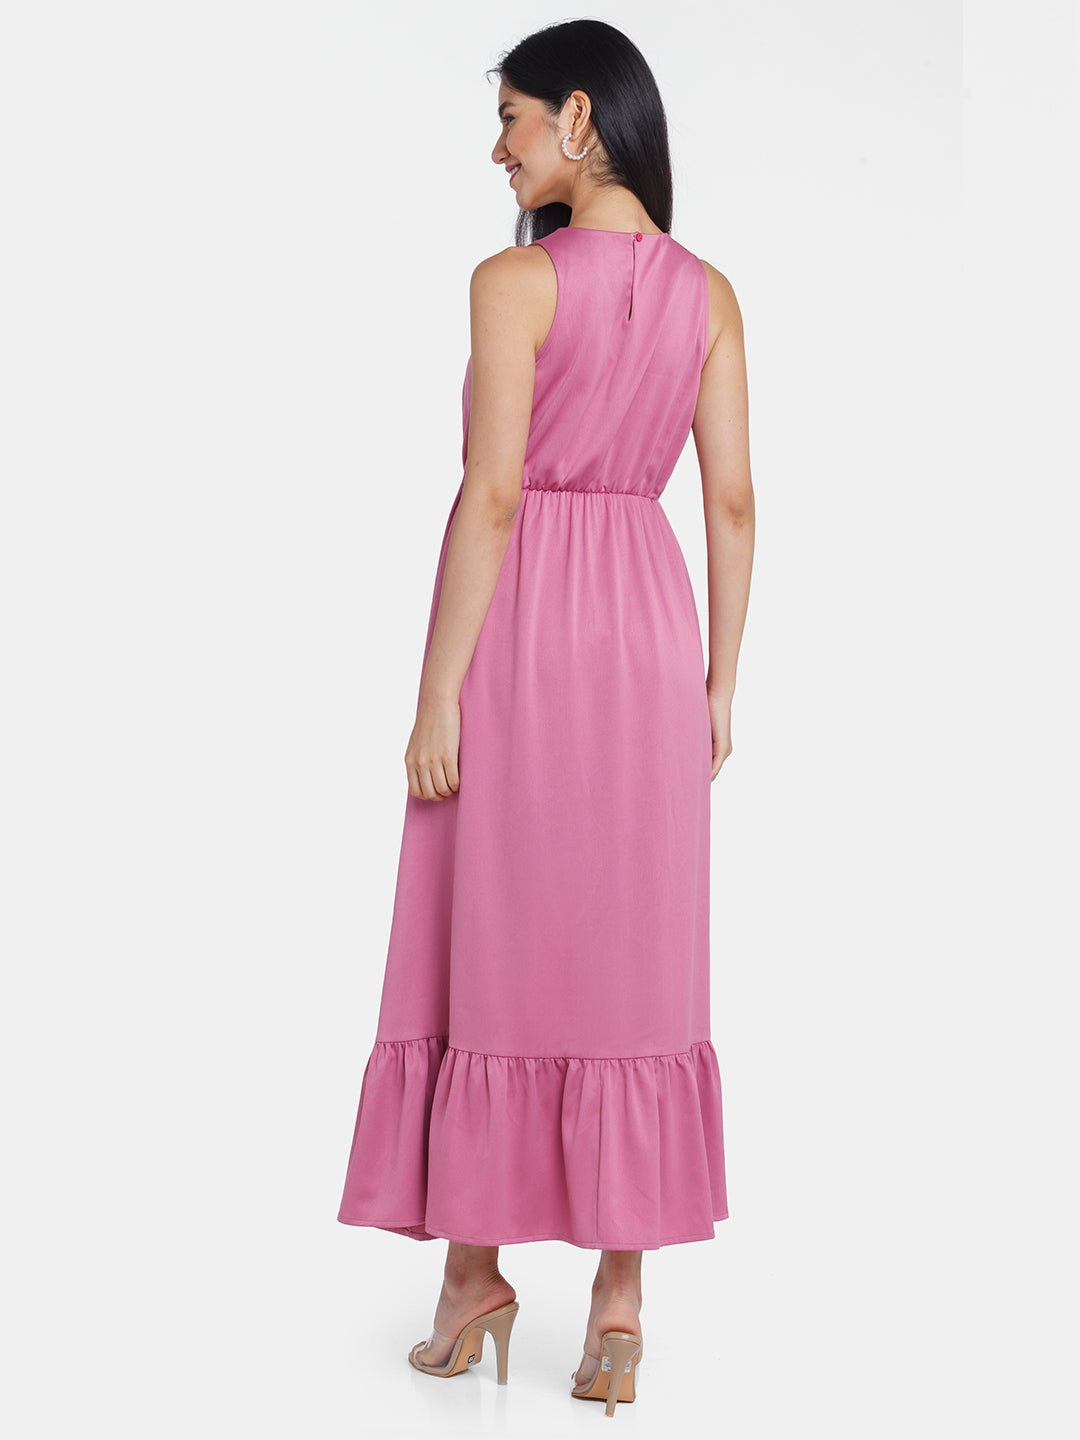 Pink Solid Ruffled Maxi Dress For Women